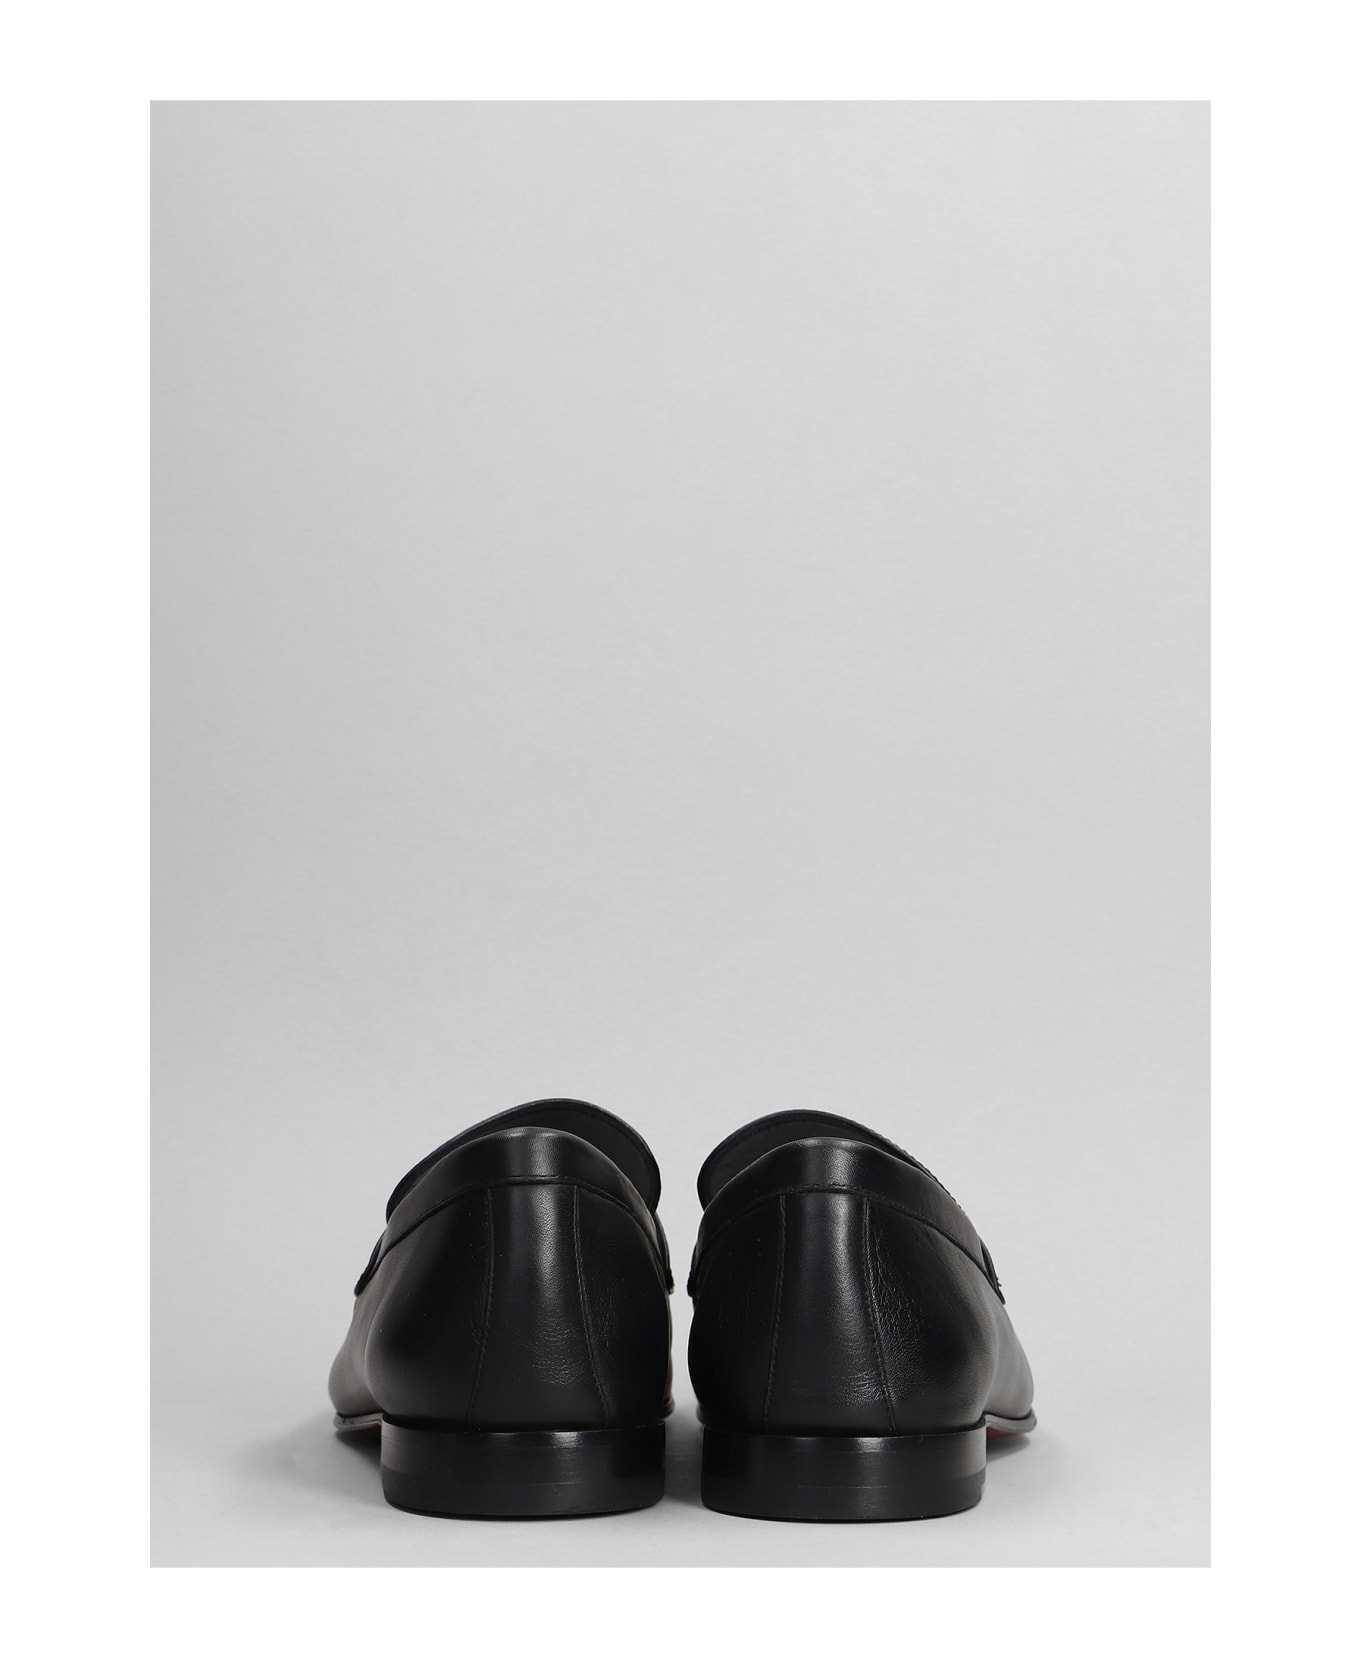 Christian Louboutin Mj Moc Loafers In Black Leather - black